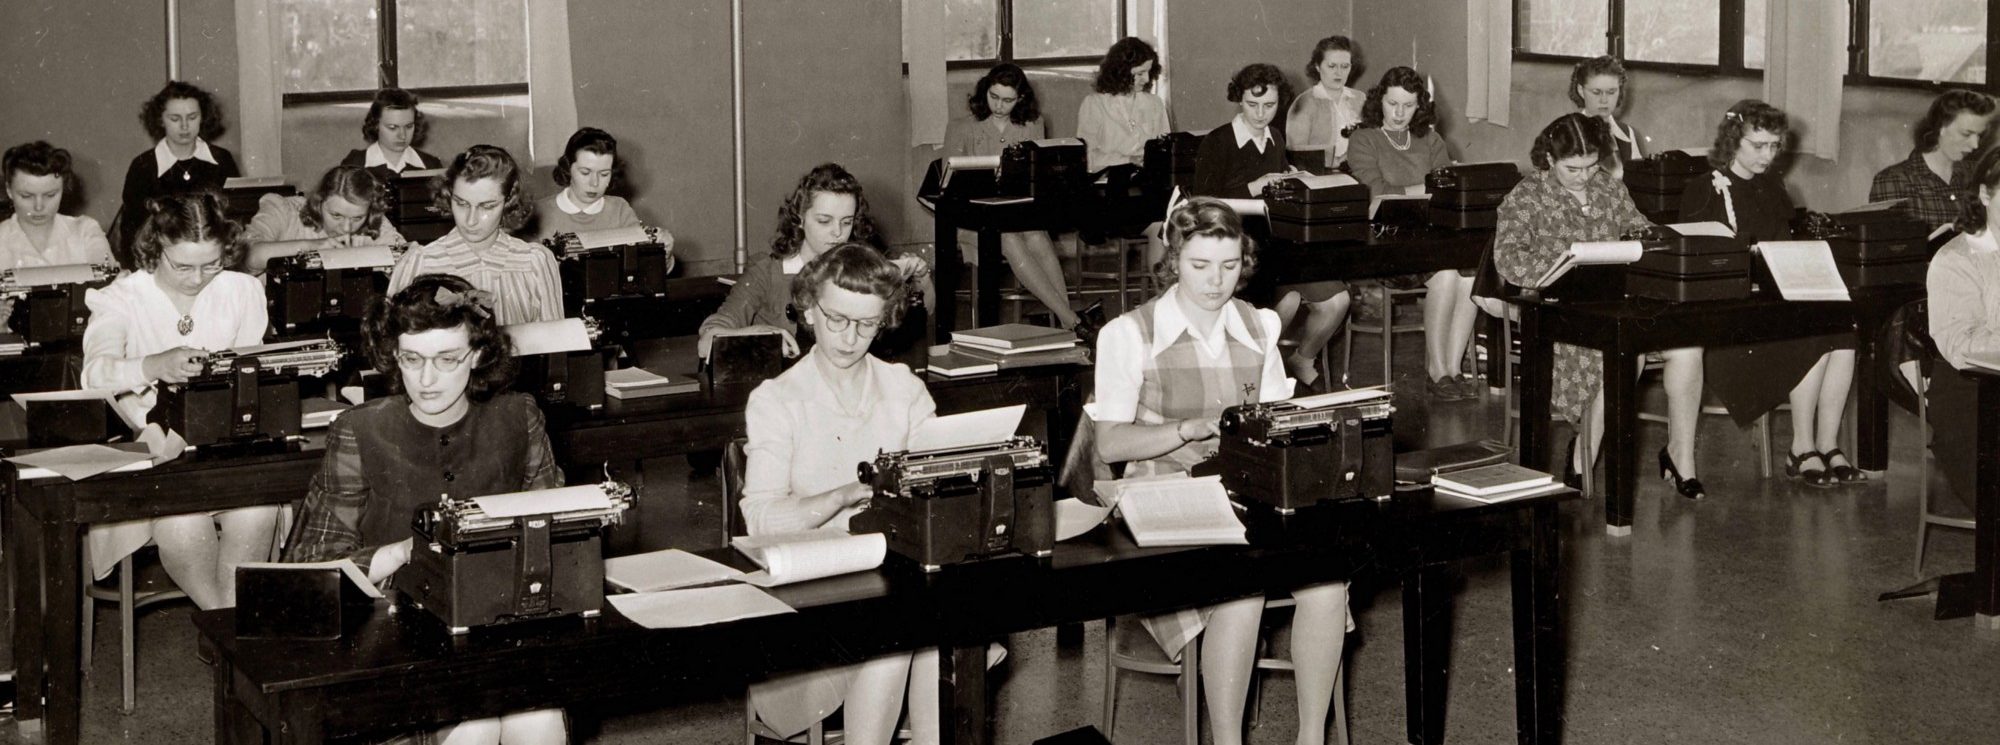 St. Catherine University, Mendel Hall Typing Class, 1942. Source.